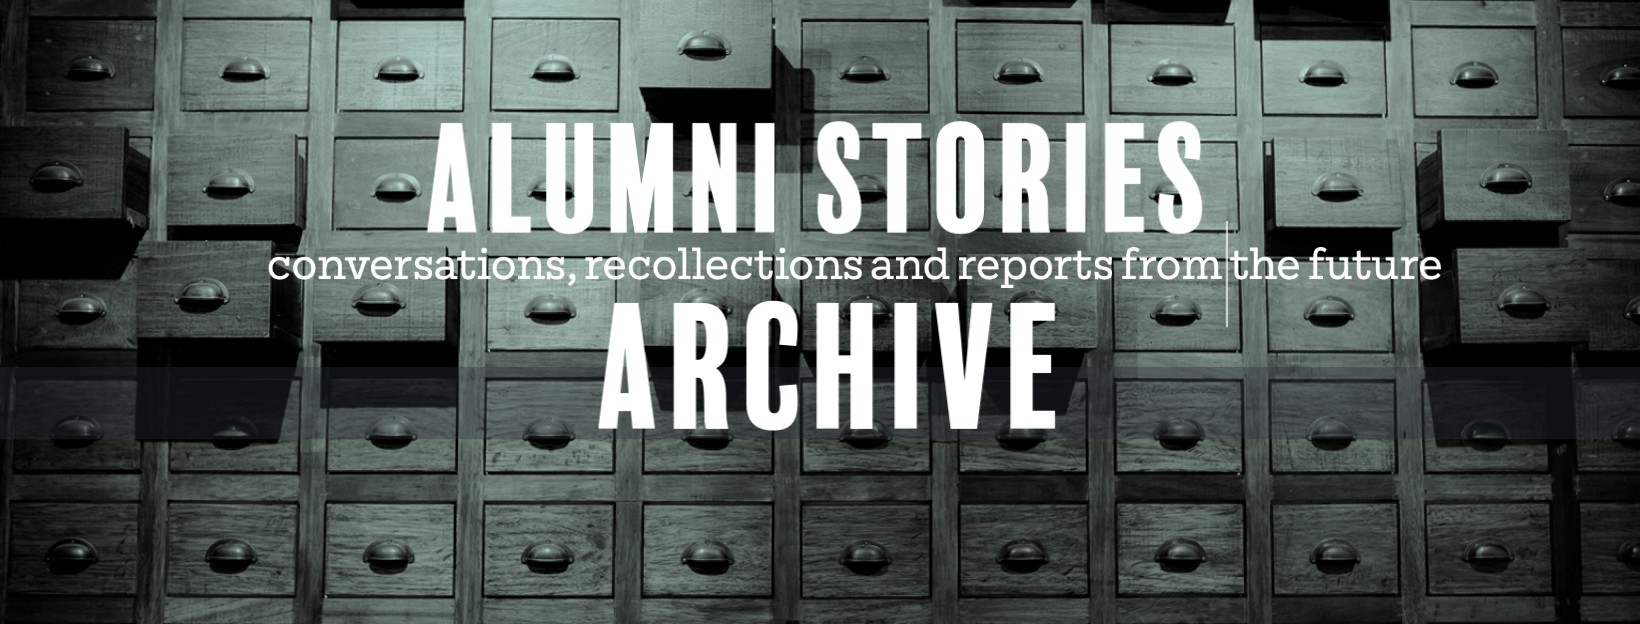 Alumni Stories Archive banner, with old card catalogue image behind